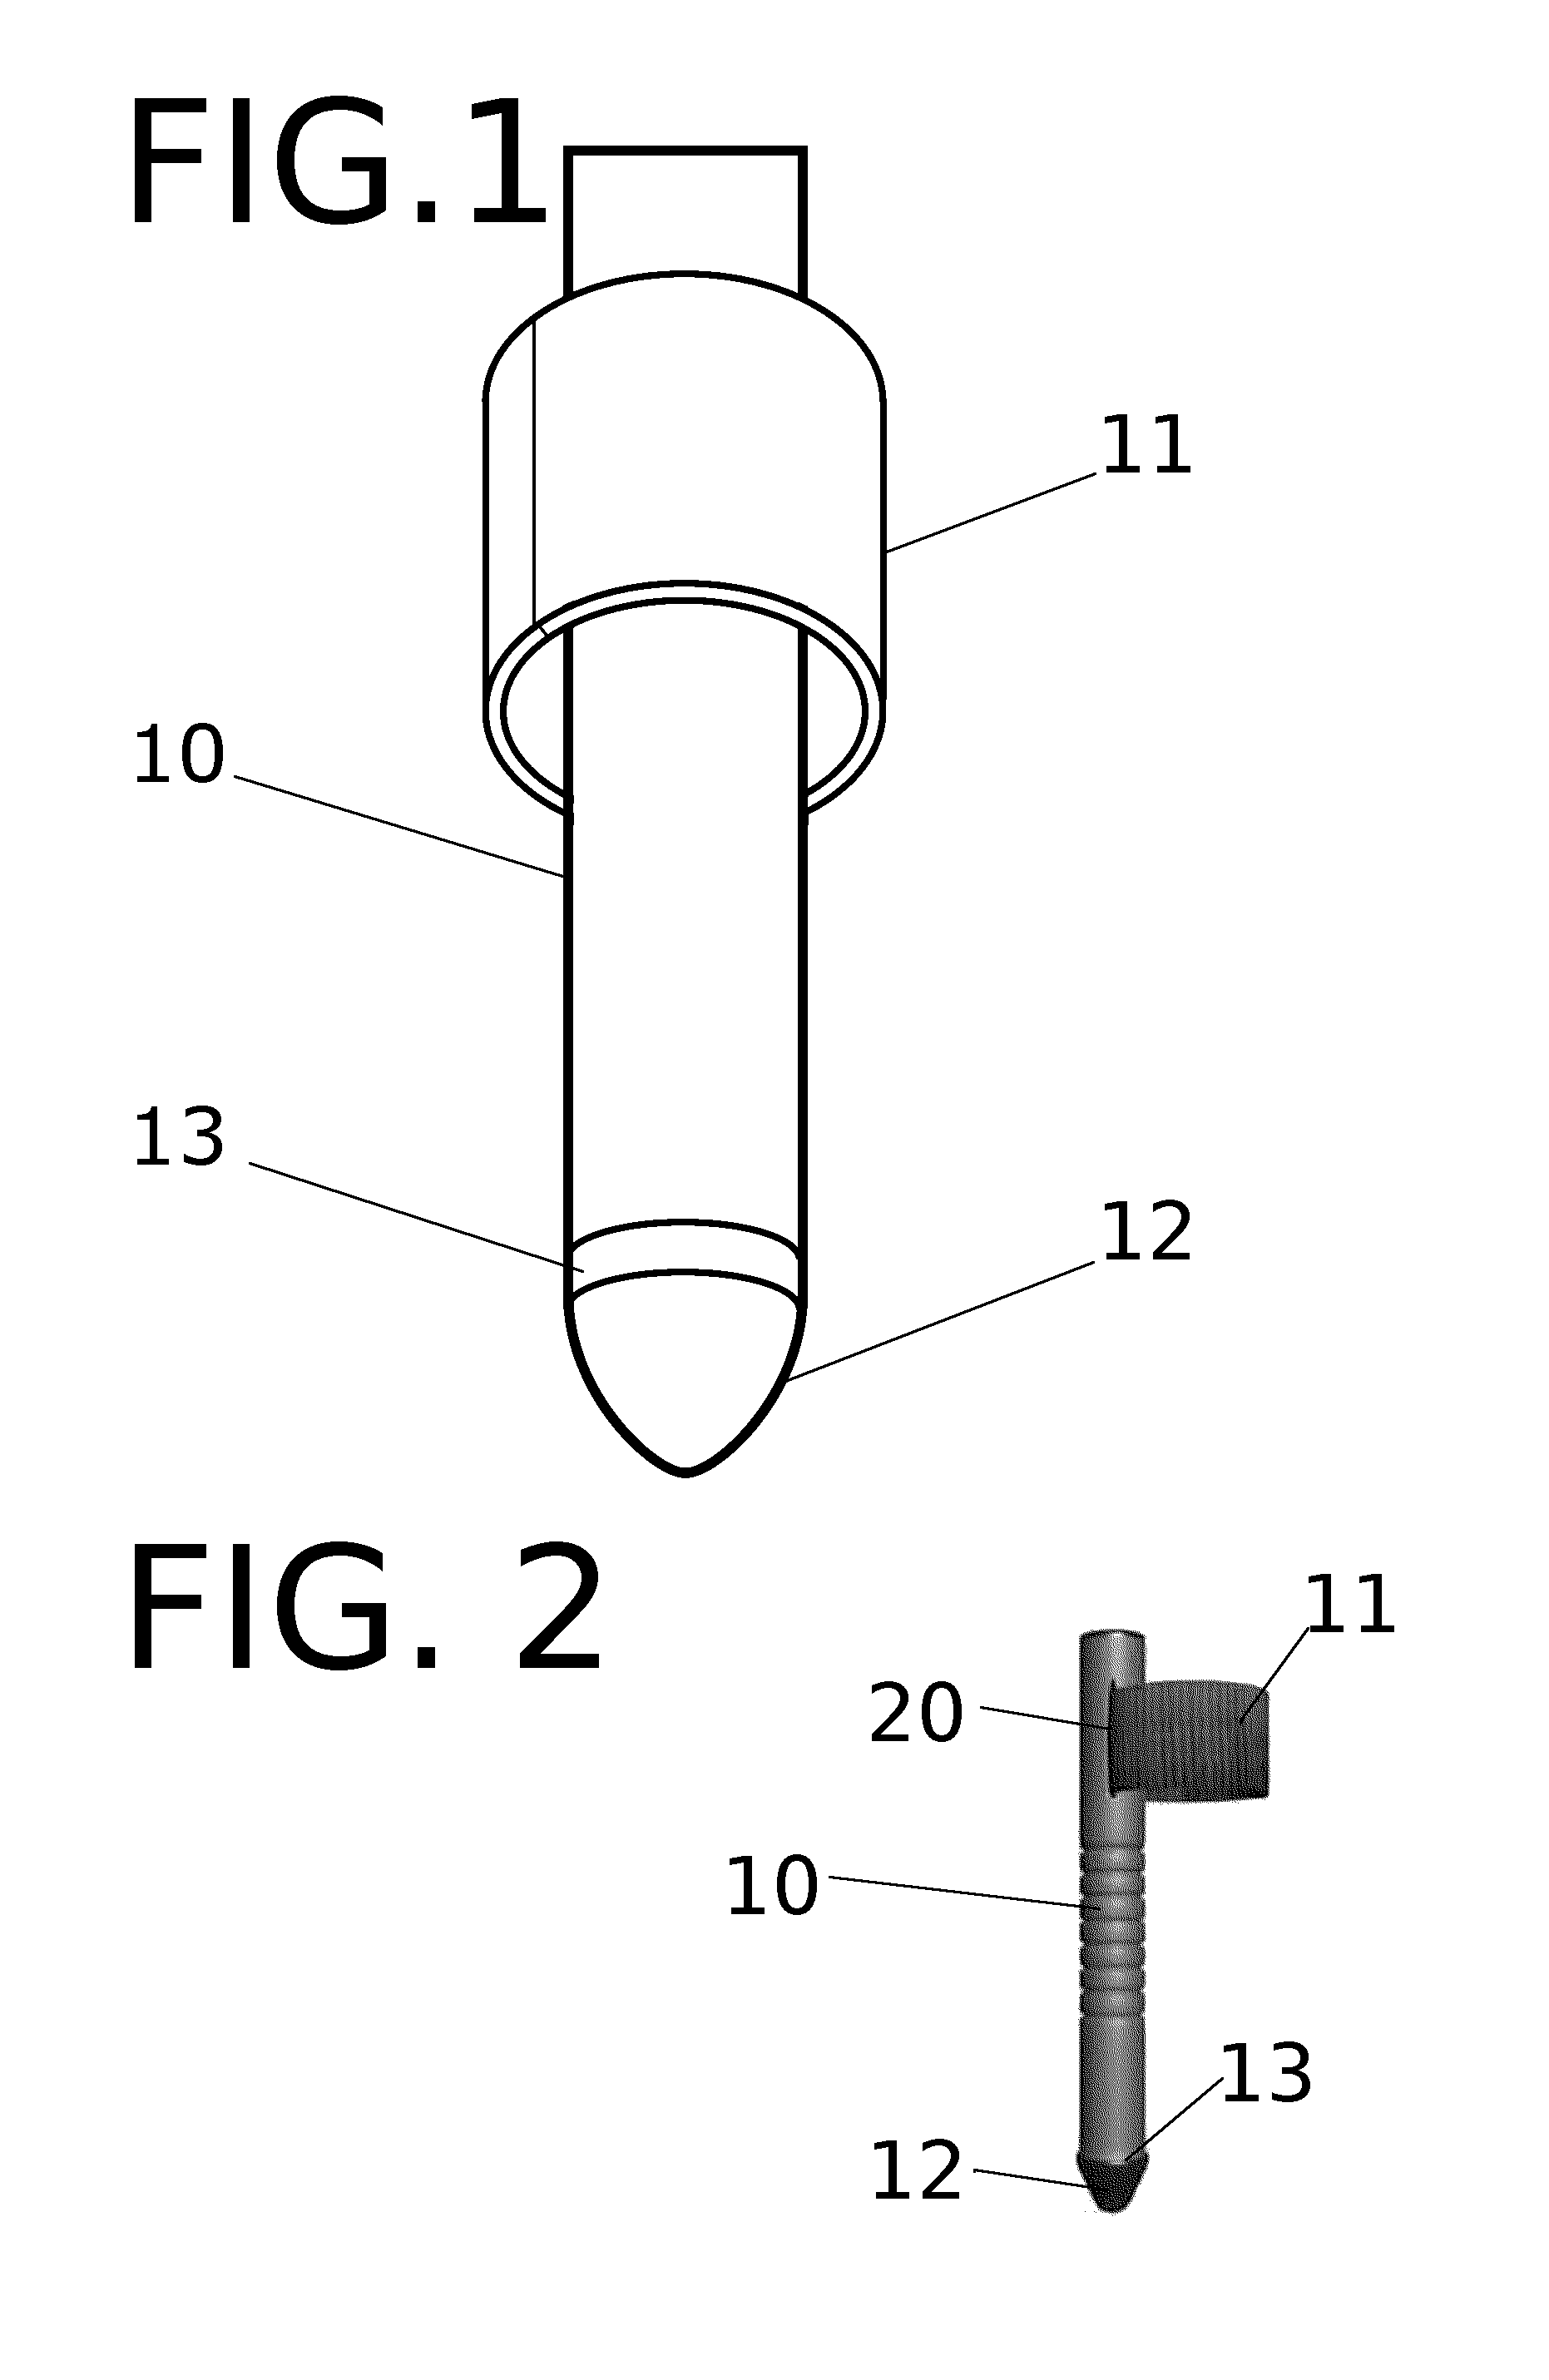 Finger stylus for touch screen devices